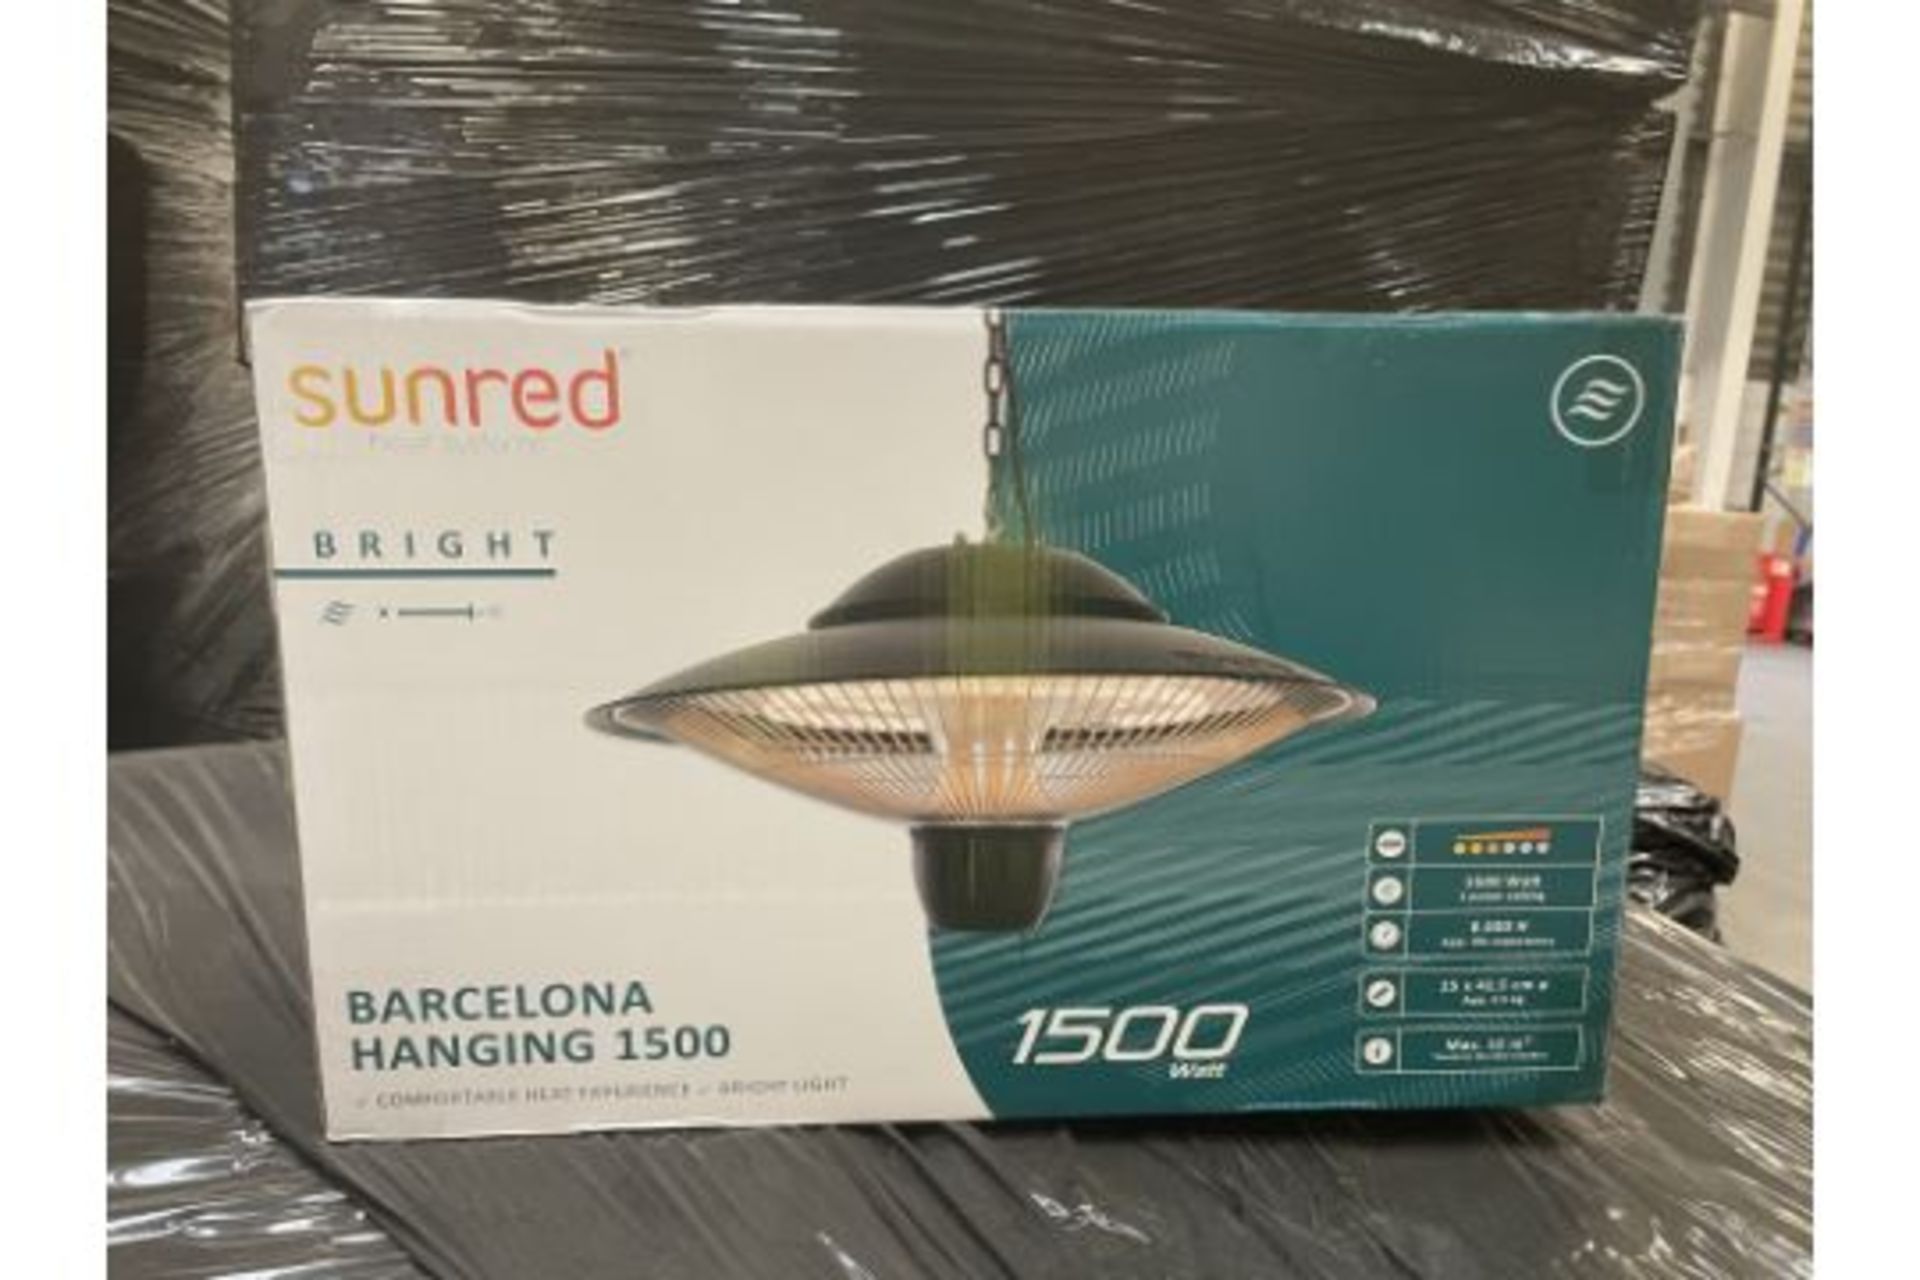 Trade Lot 4 x Brand New The Sunred Heater Barcelona Hanging 1500W RRP £299.A high quality and - Image 2 of 3